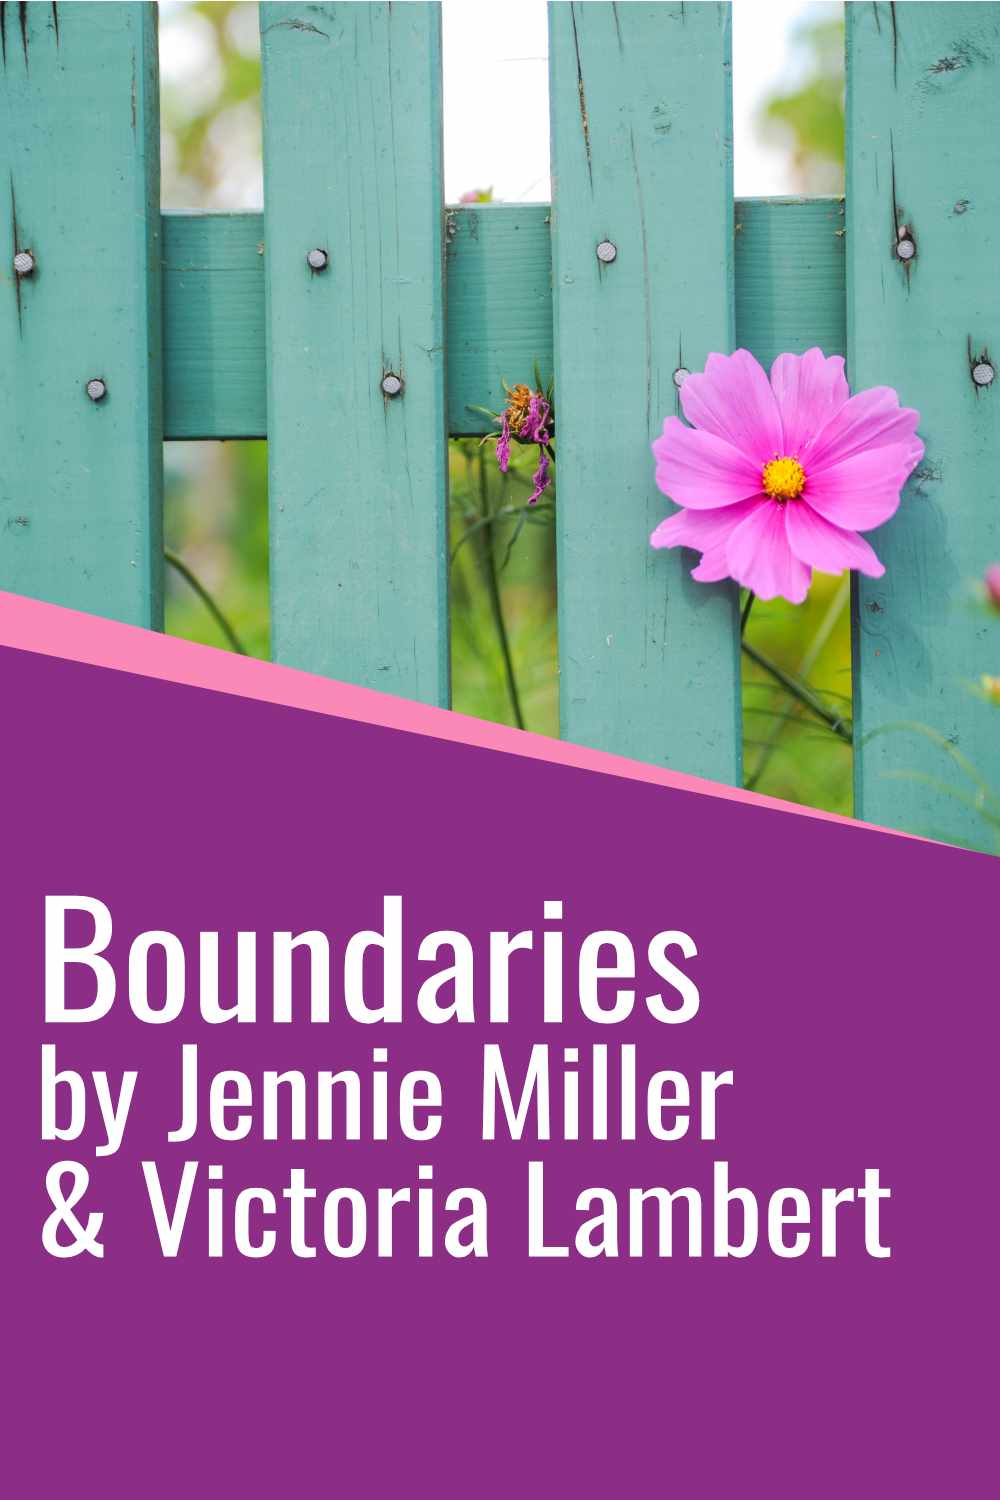 An image for social media with a green fence and pink flower and the text Boundaries by Jennie Miller & Victoria Lambert